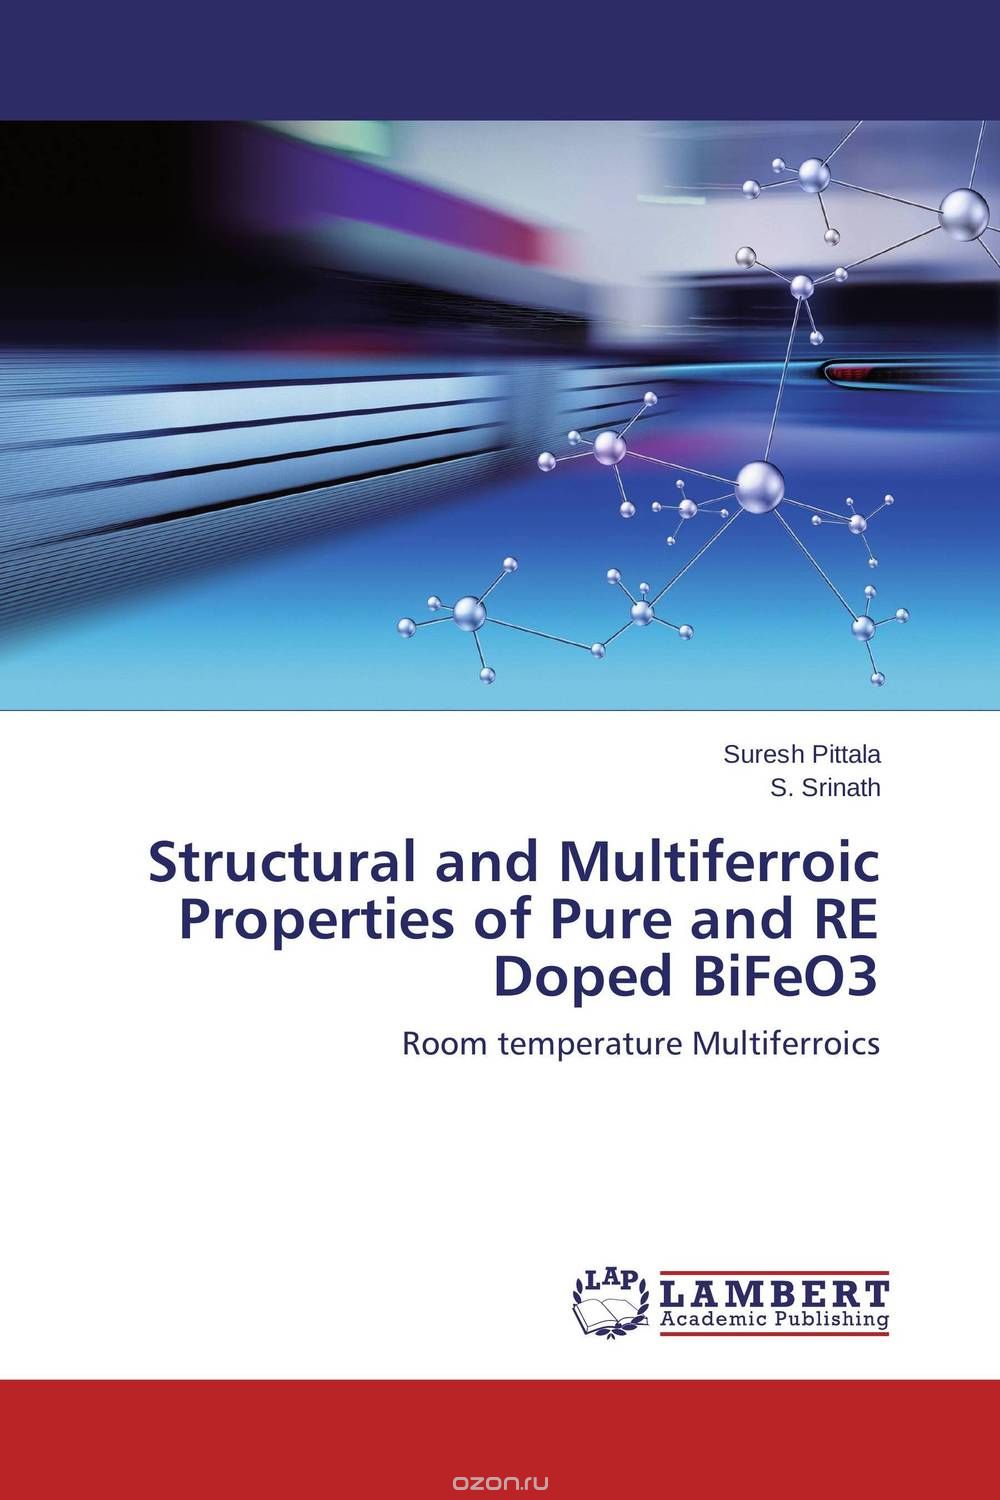 Structural and Multiferroic Properties of Pure and RE Doped BiFeO3